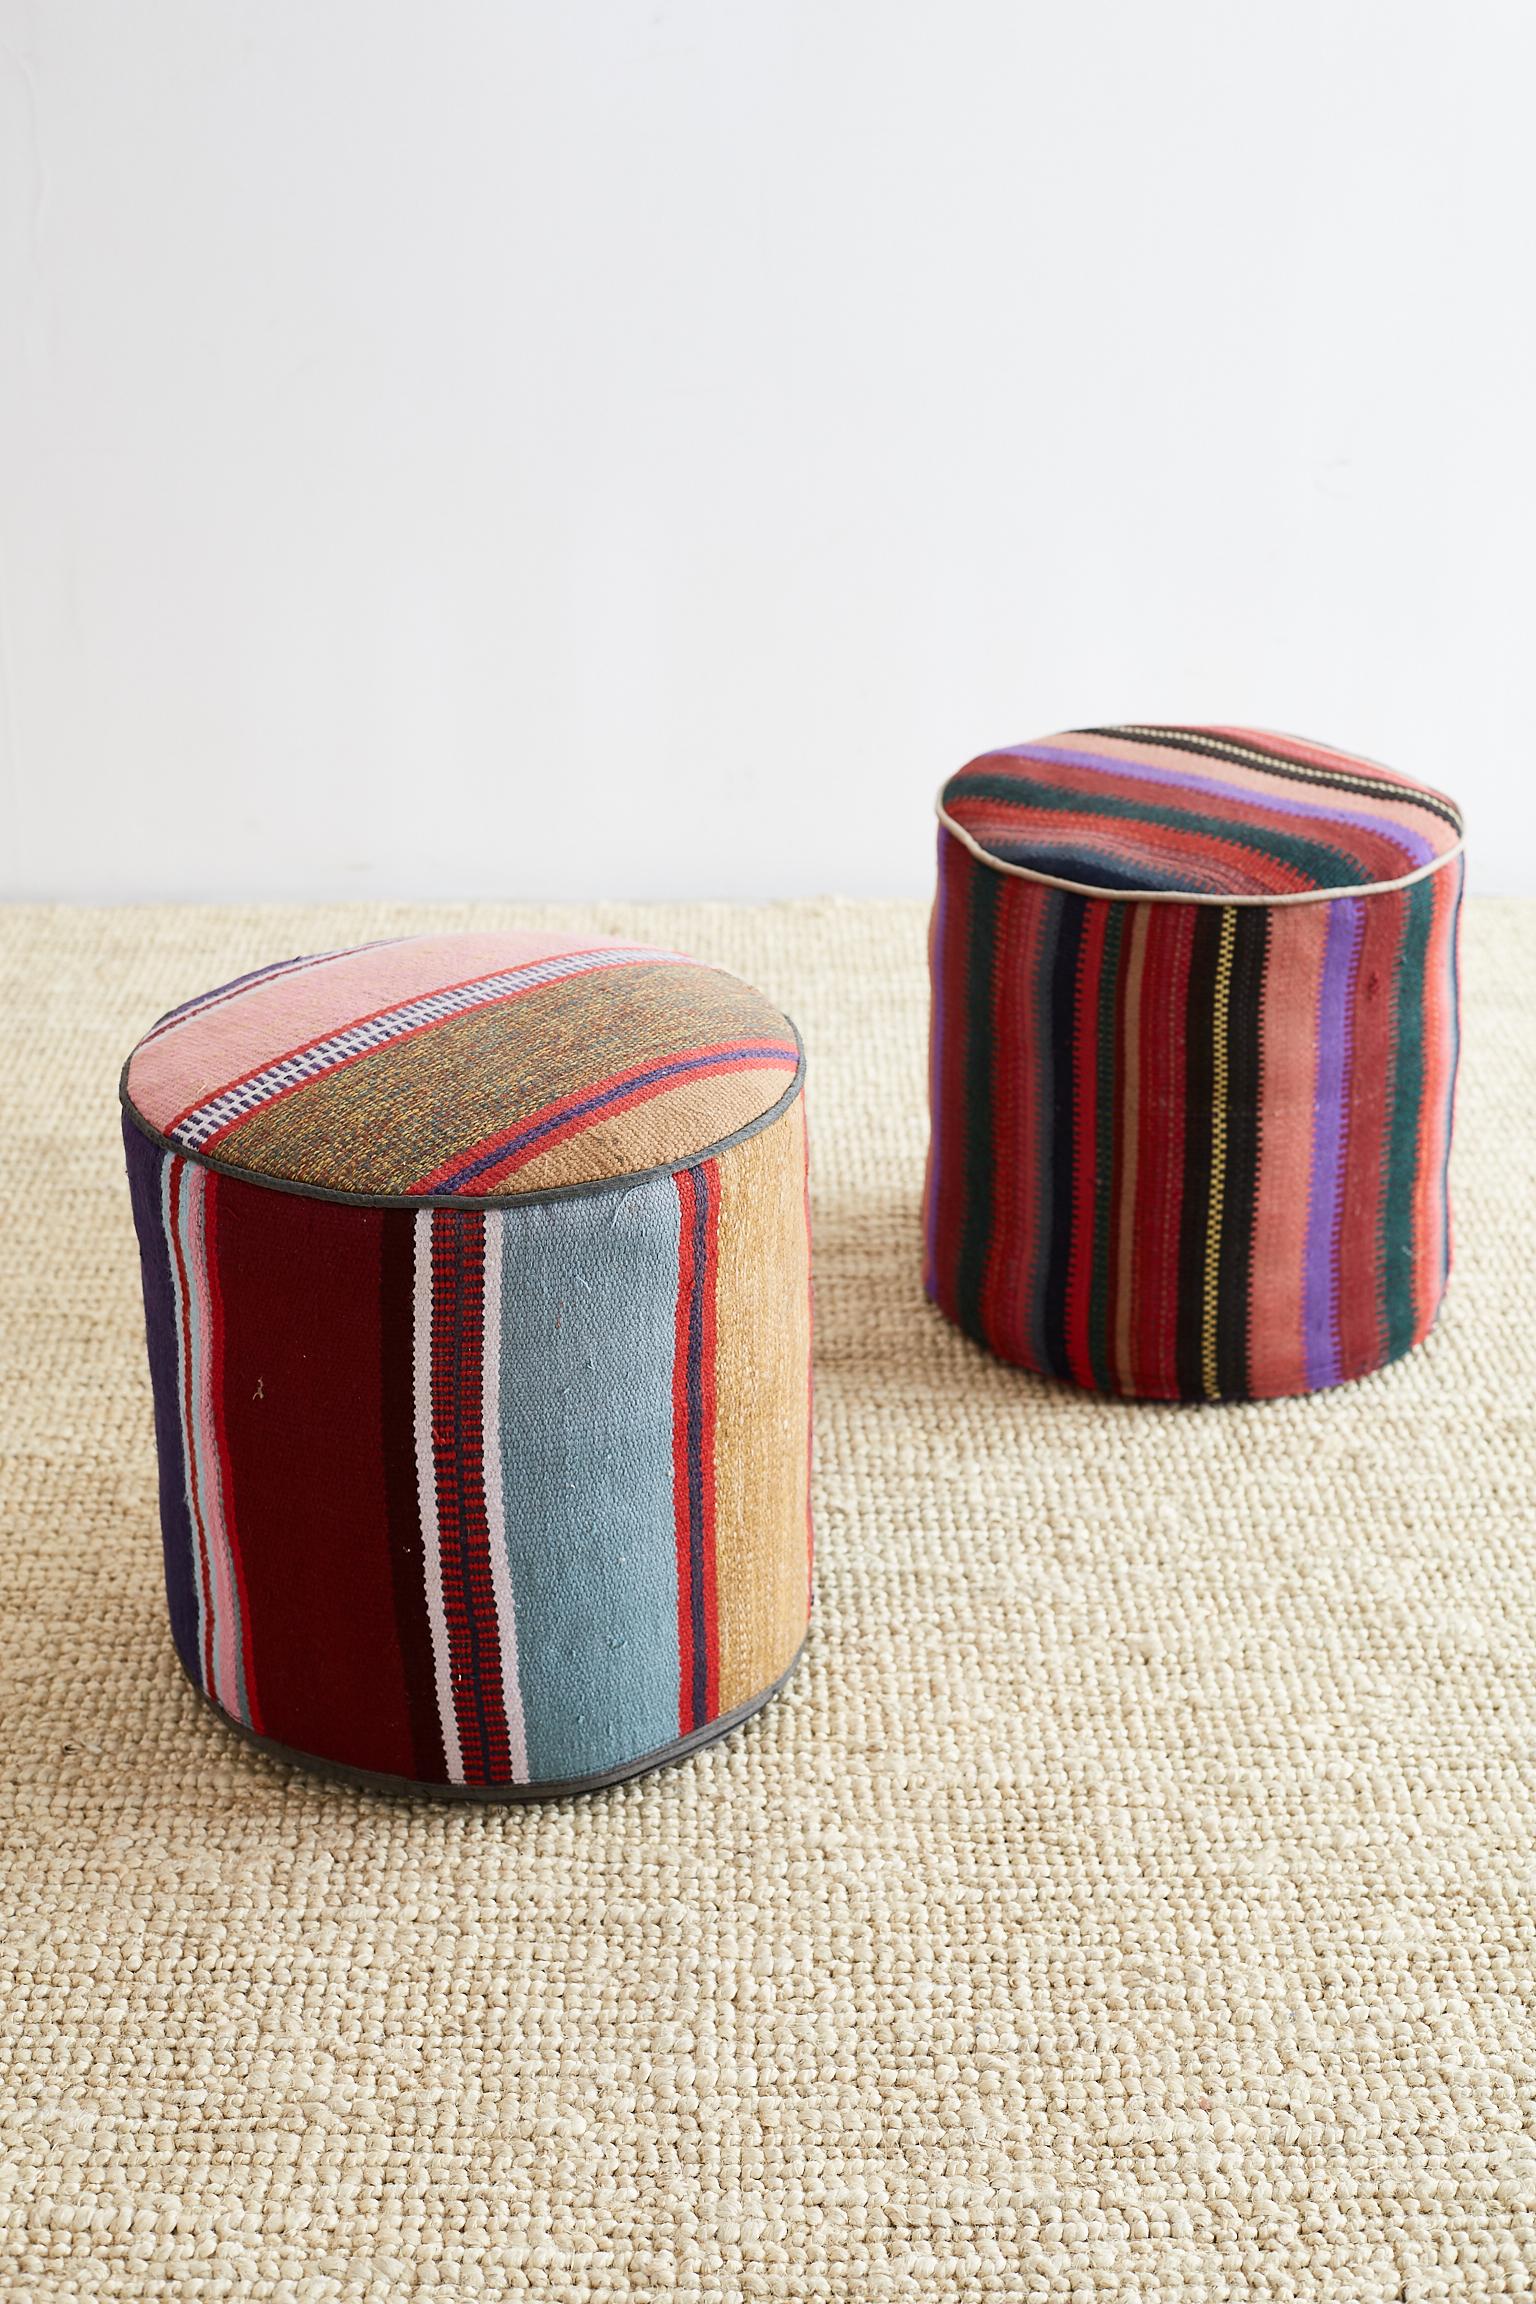 Colorful pair of Turkish Kilim striped pouf ottoman or hassocks. The stripe patterns feature geometric designs and the poufs have a round form.

Offered by Erin Lane Estate, Oakland, CA.